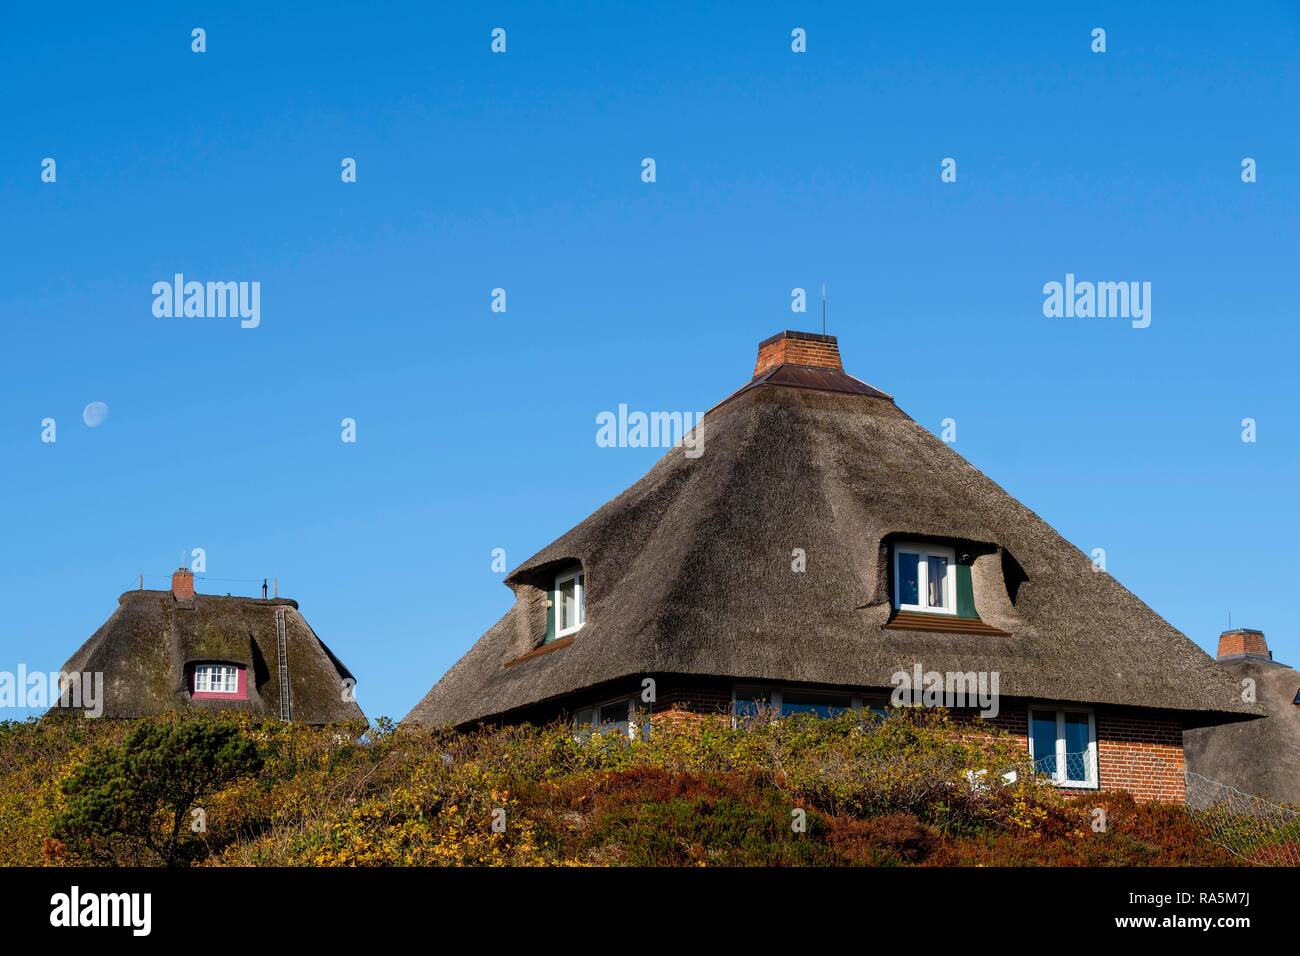 Typical Frisian houses with thatched roofs in the dunes of Hörnum, Sylt, Nordfriesland, Schleswig-Holstein, Germany Stock Photo